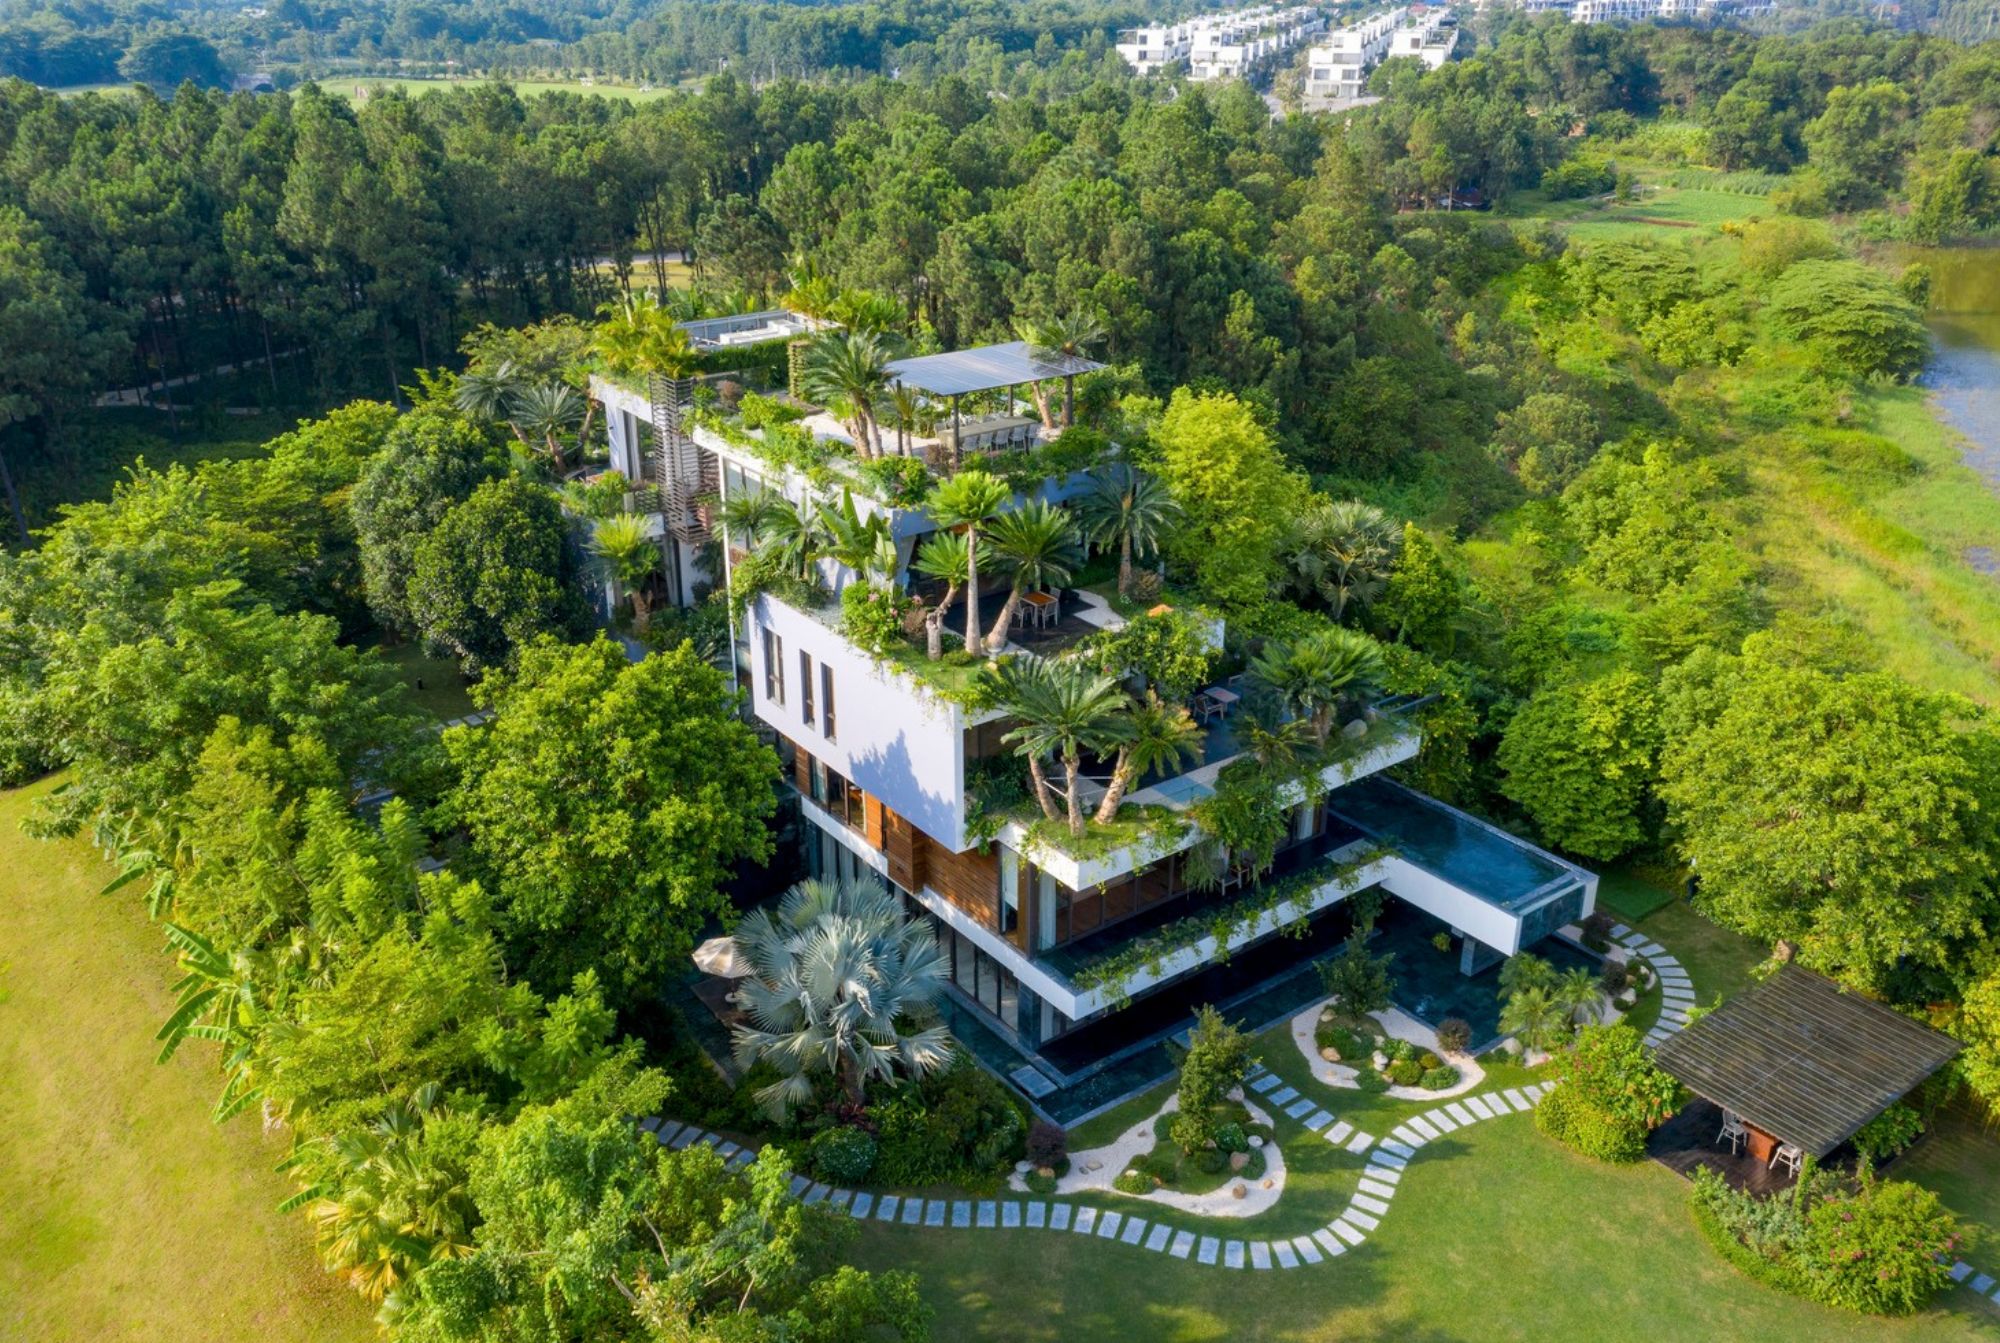 Legend Mansion Villa from a skyward perspective. Photo by Nghĩa Toản.